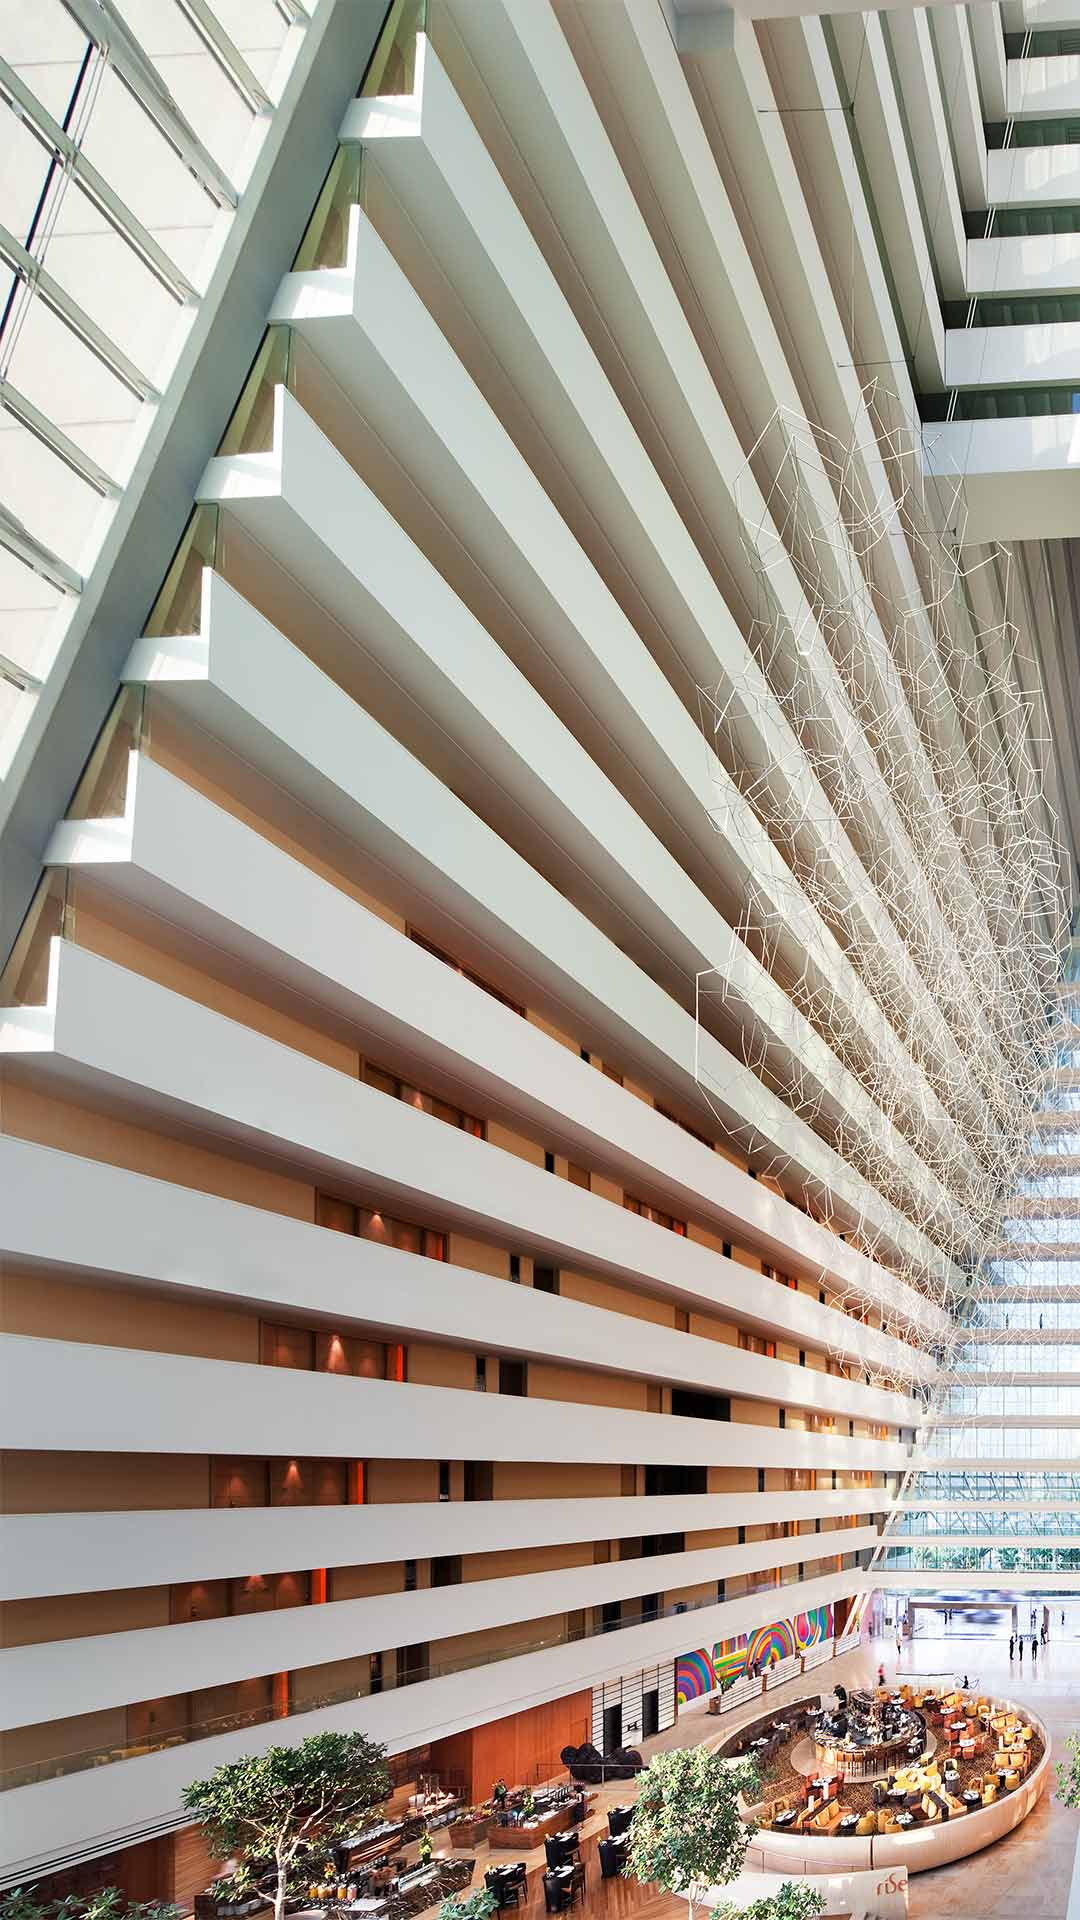 Interior of the curved architectural structure of the hotel towers at Marina Bay Sands, Singapore